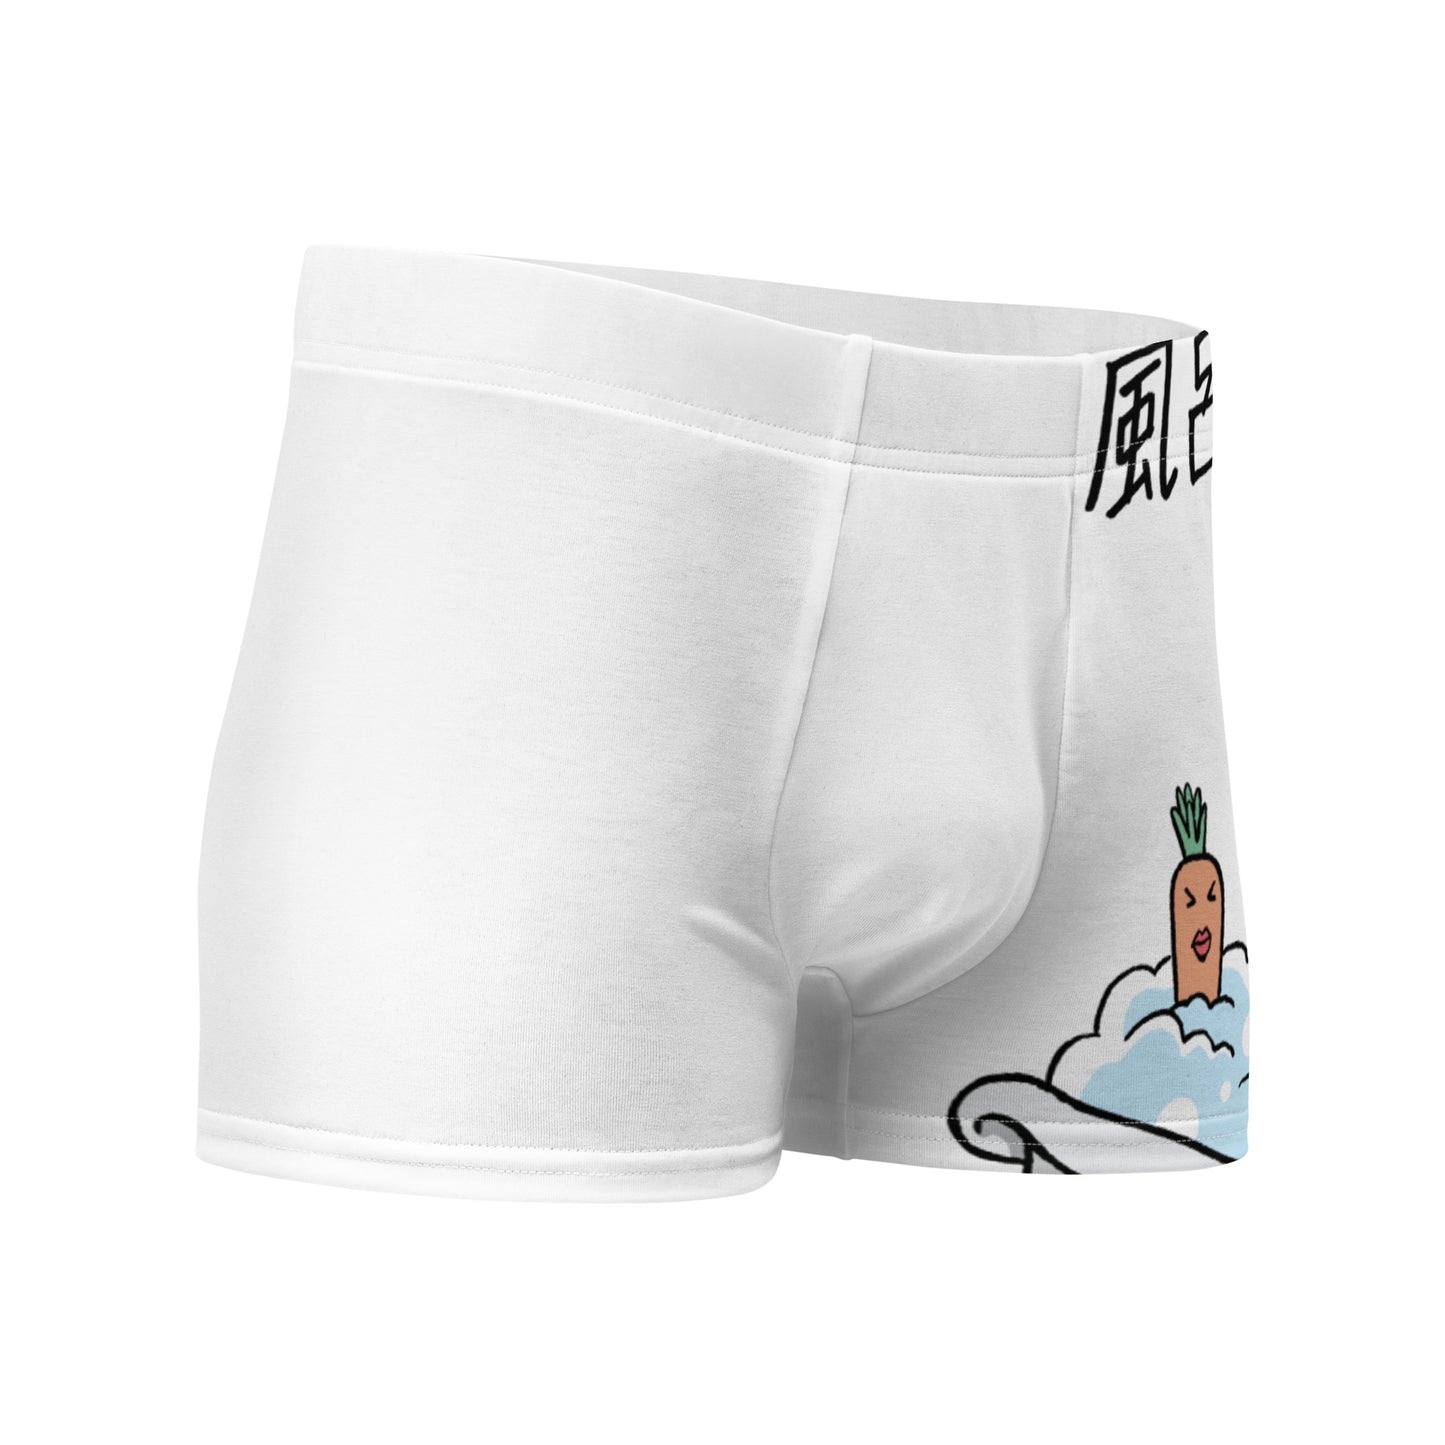 A Bathing Rabbit by tokyozoodesign Boxer Briefs